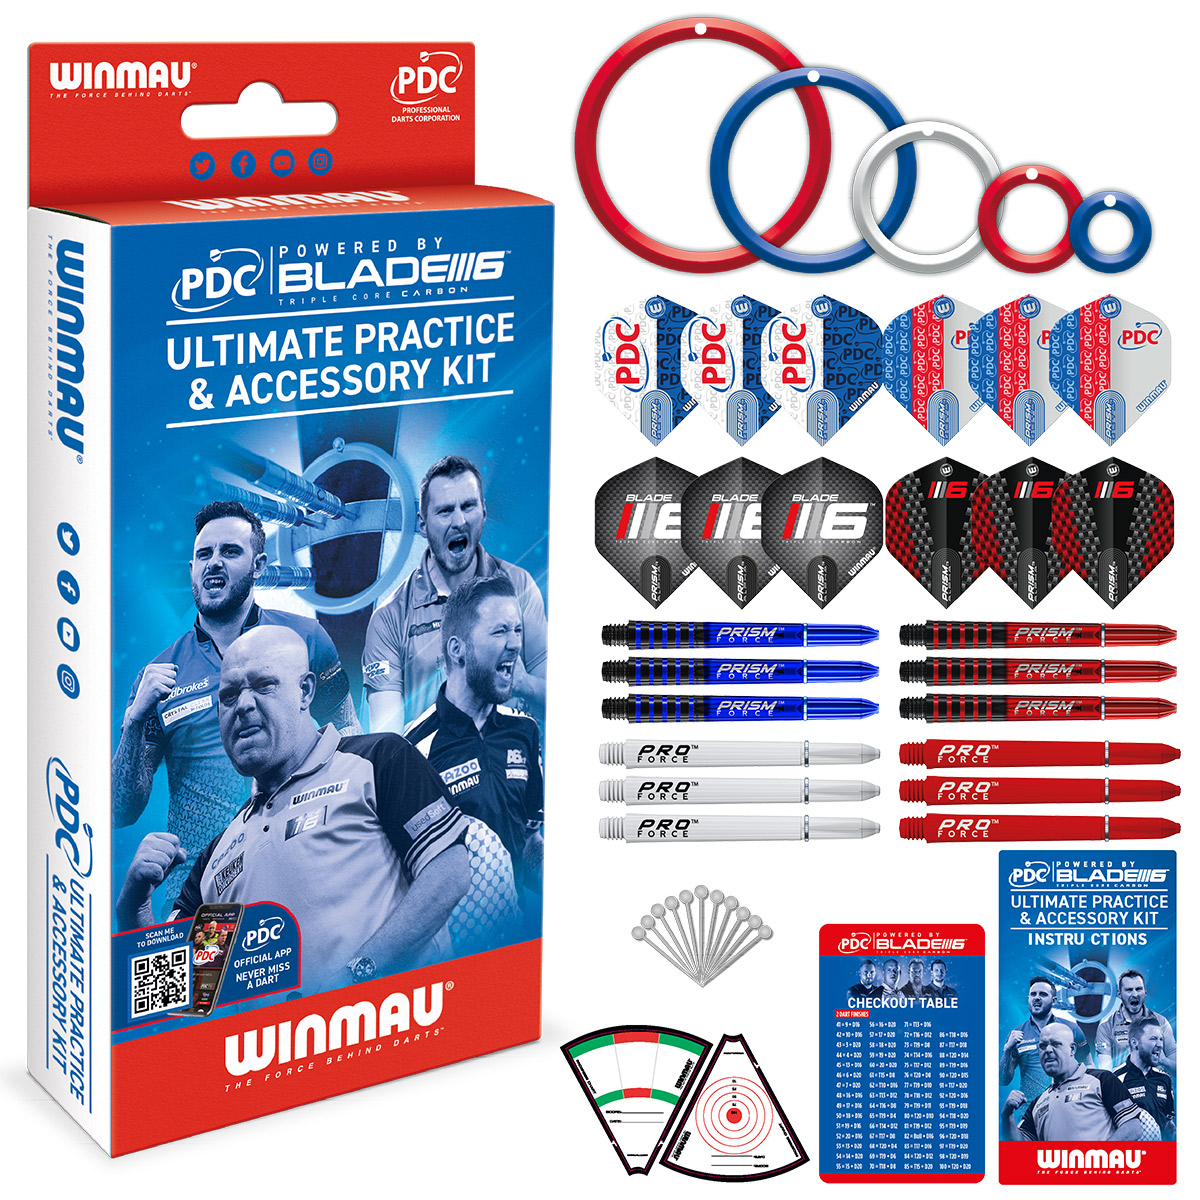 PDC Ultimate practice & accessory kit